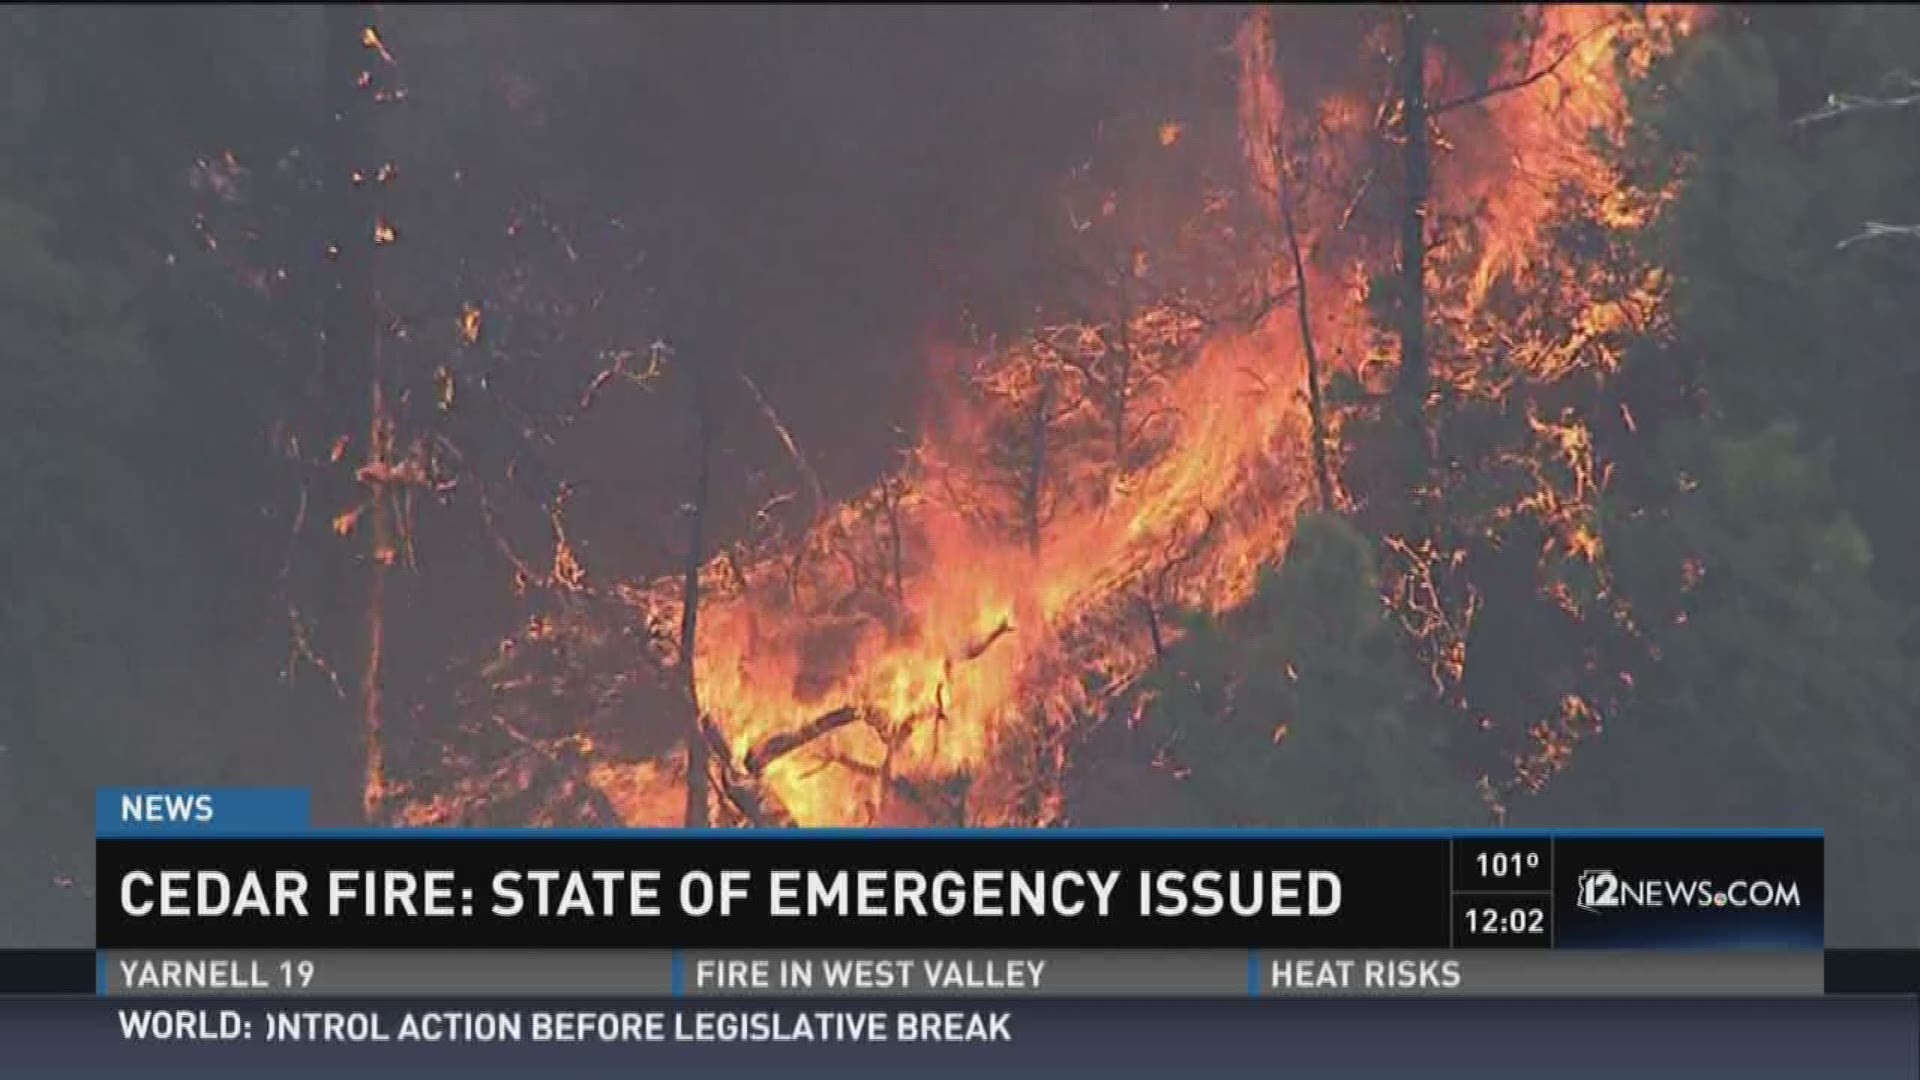 The fire, which has been burning for a week, is about 20 percent contained and has burned over 40,000 acres.